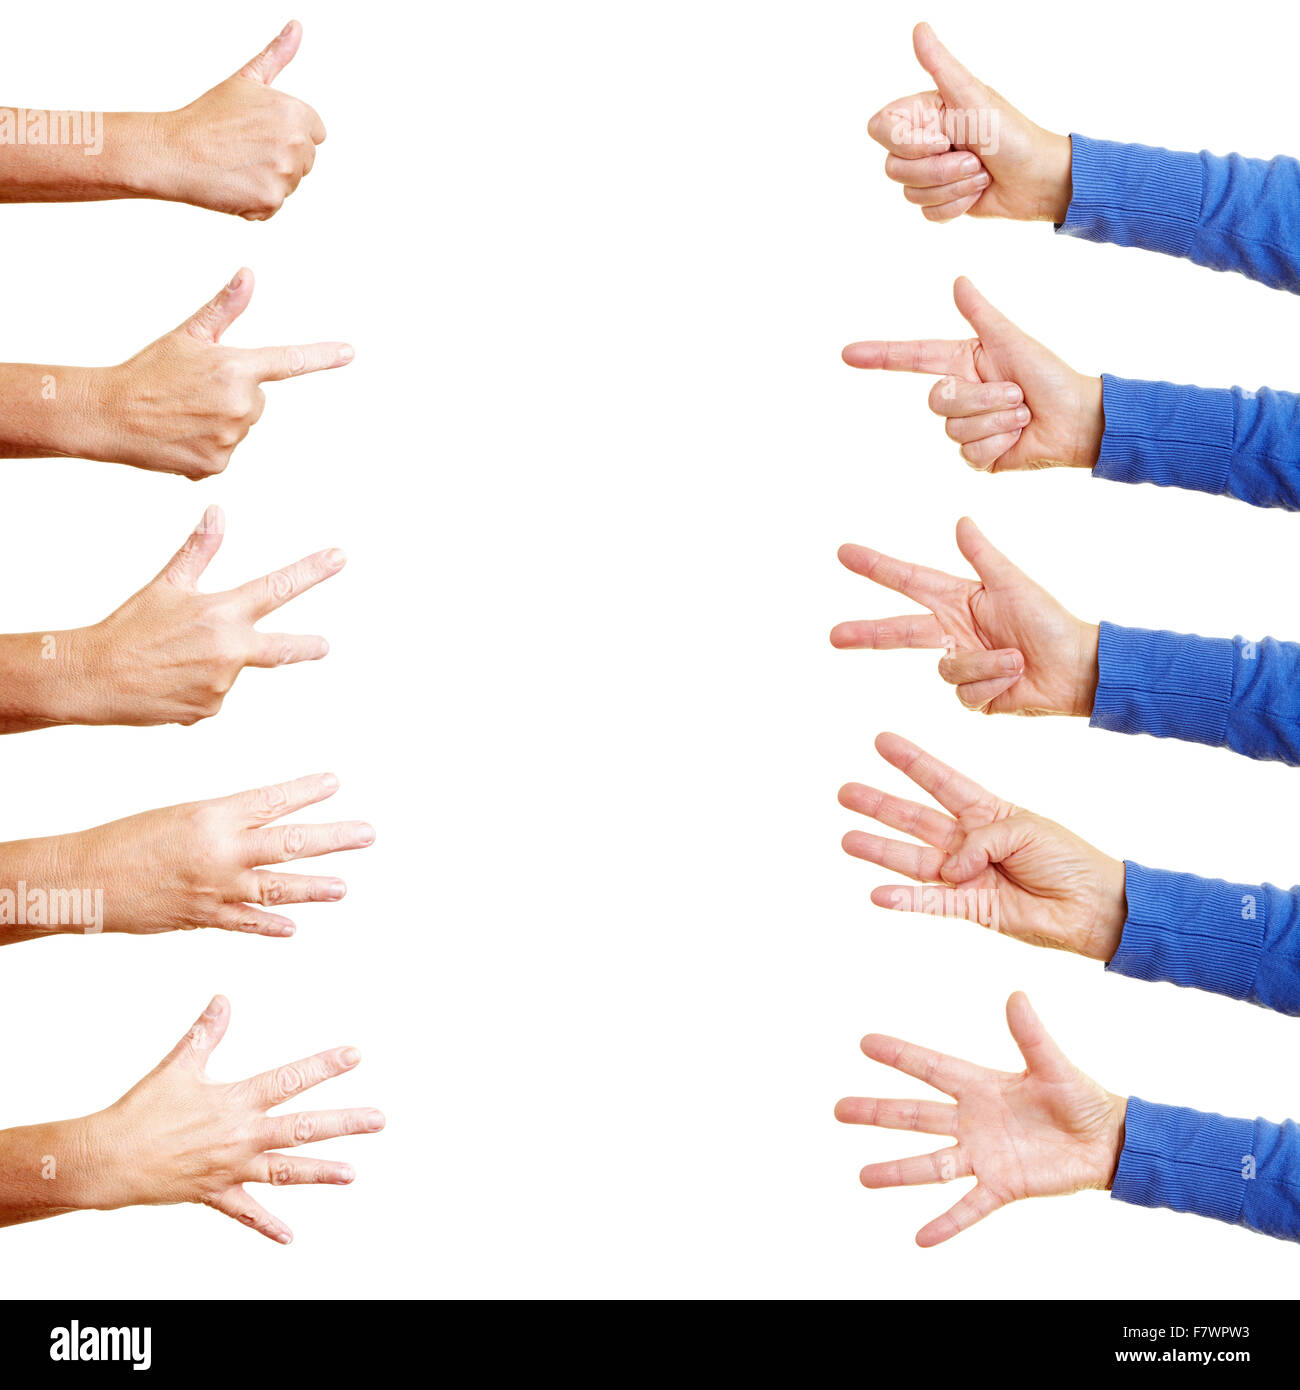 Many hands showing numbers from 1 to 5 Stock Photo